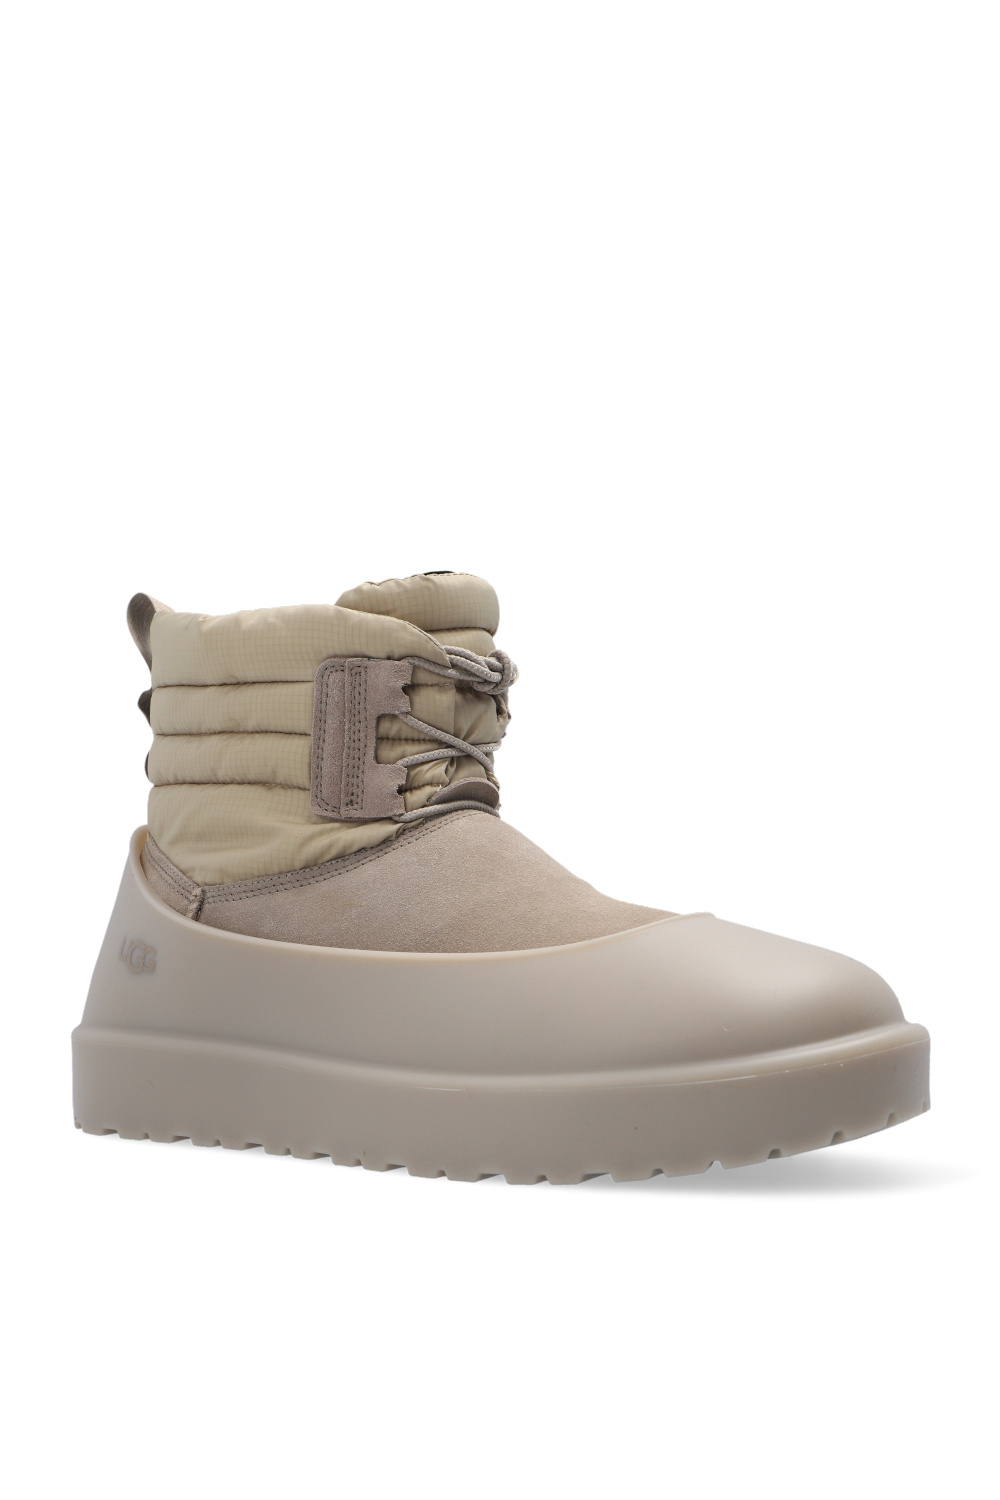 UGG ‘Classic Mini Lace Up Weather’ snow boots